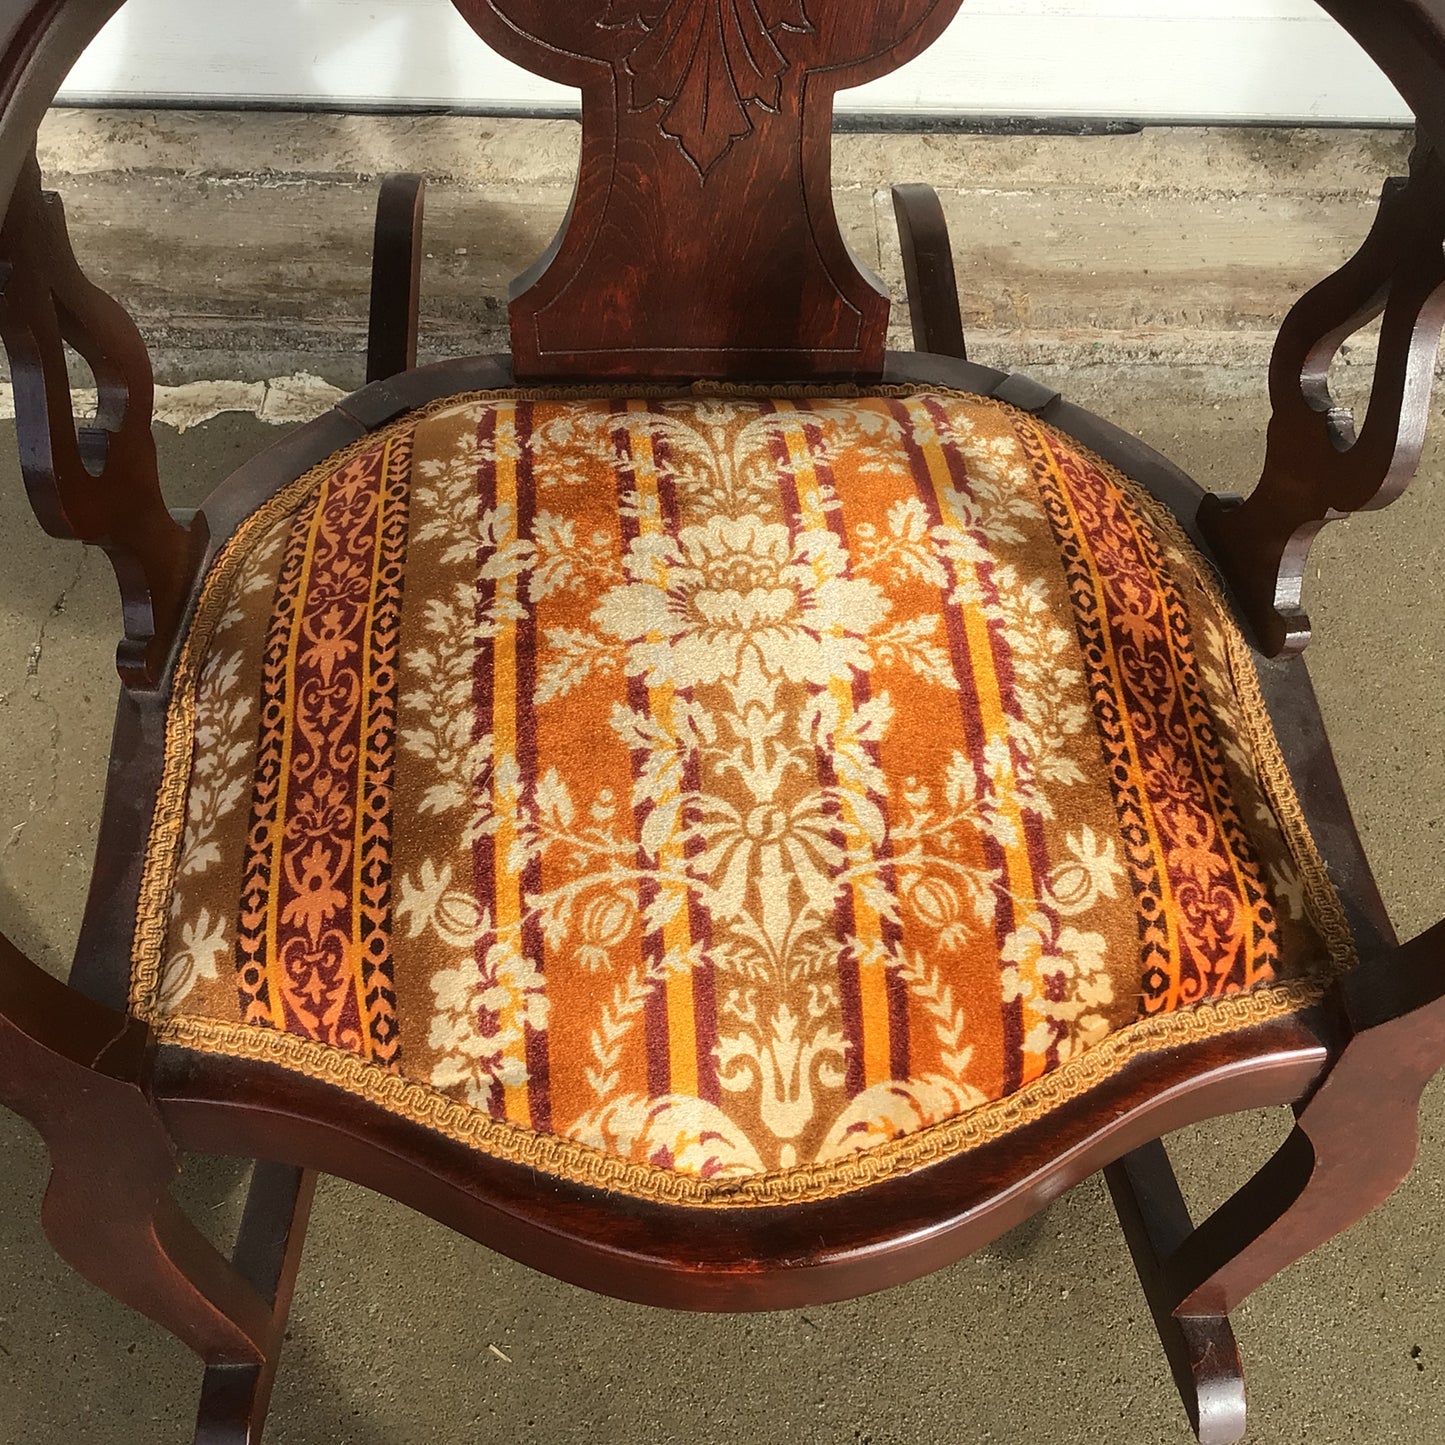 Antique Carved Rocking Chair